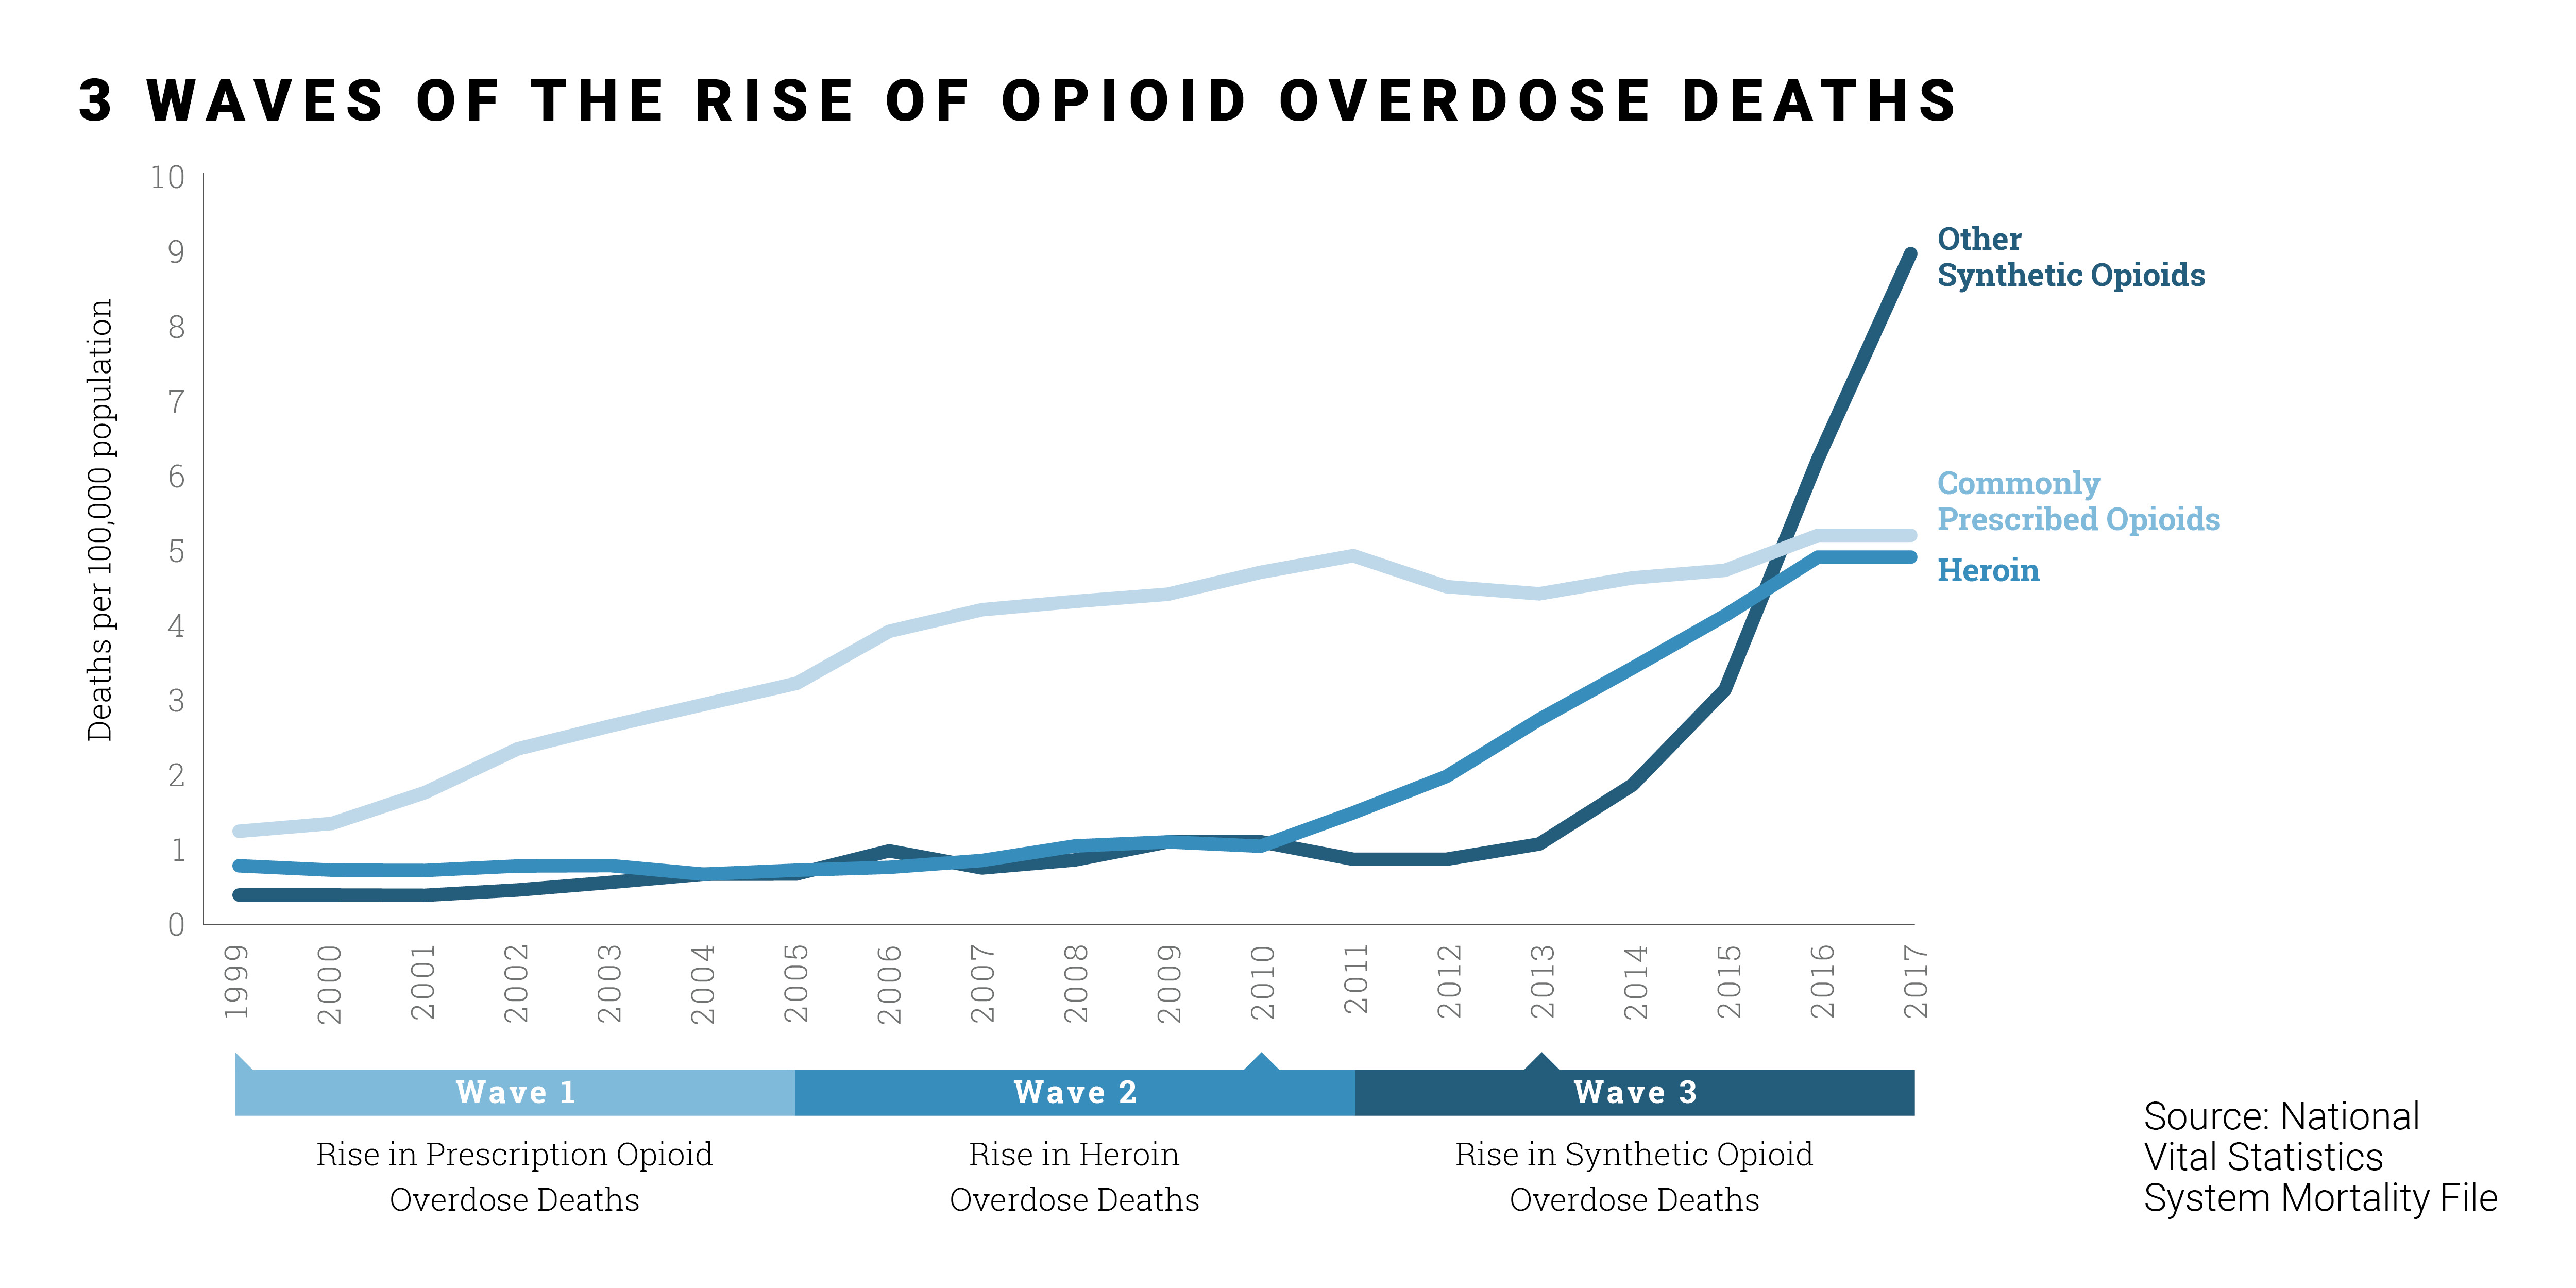 3 Waves of the Rise of Opioid Overdose Deaths